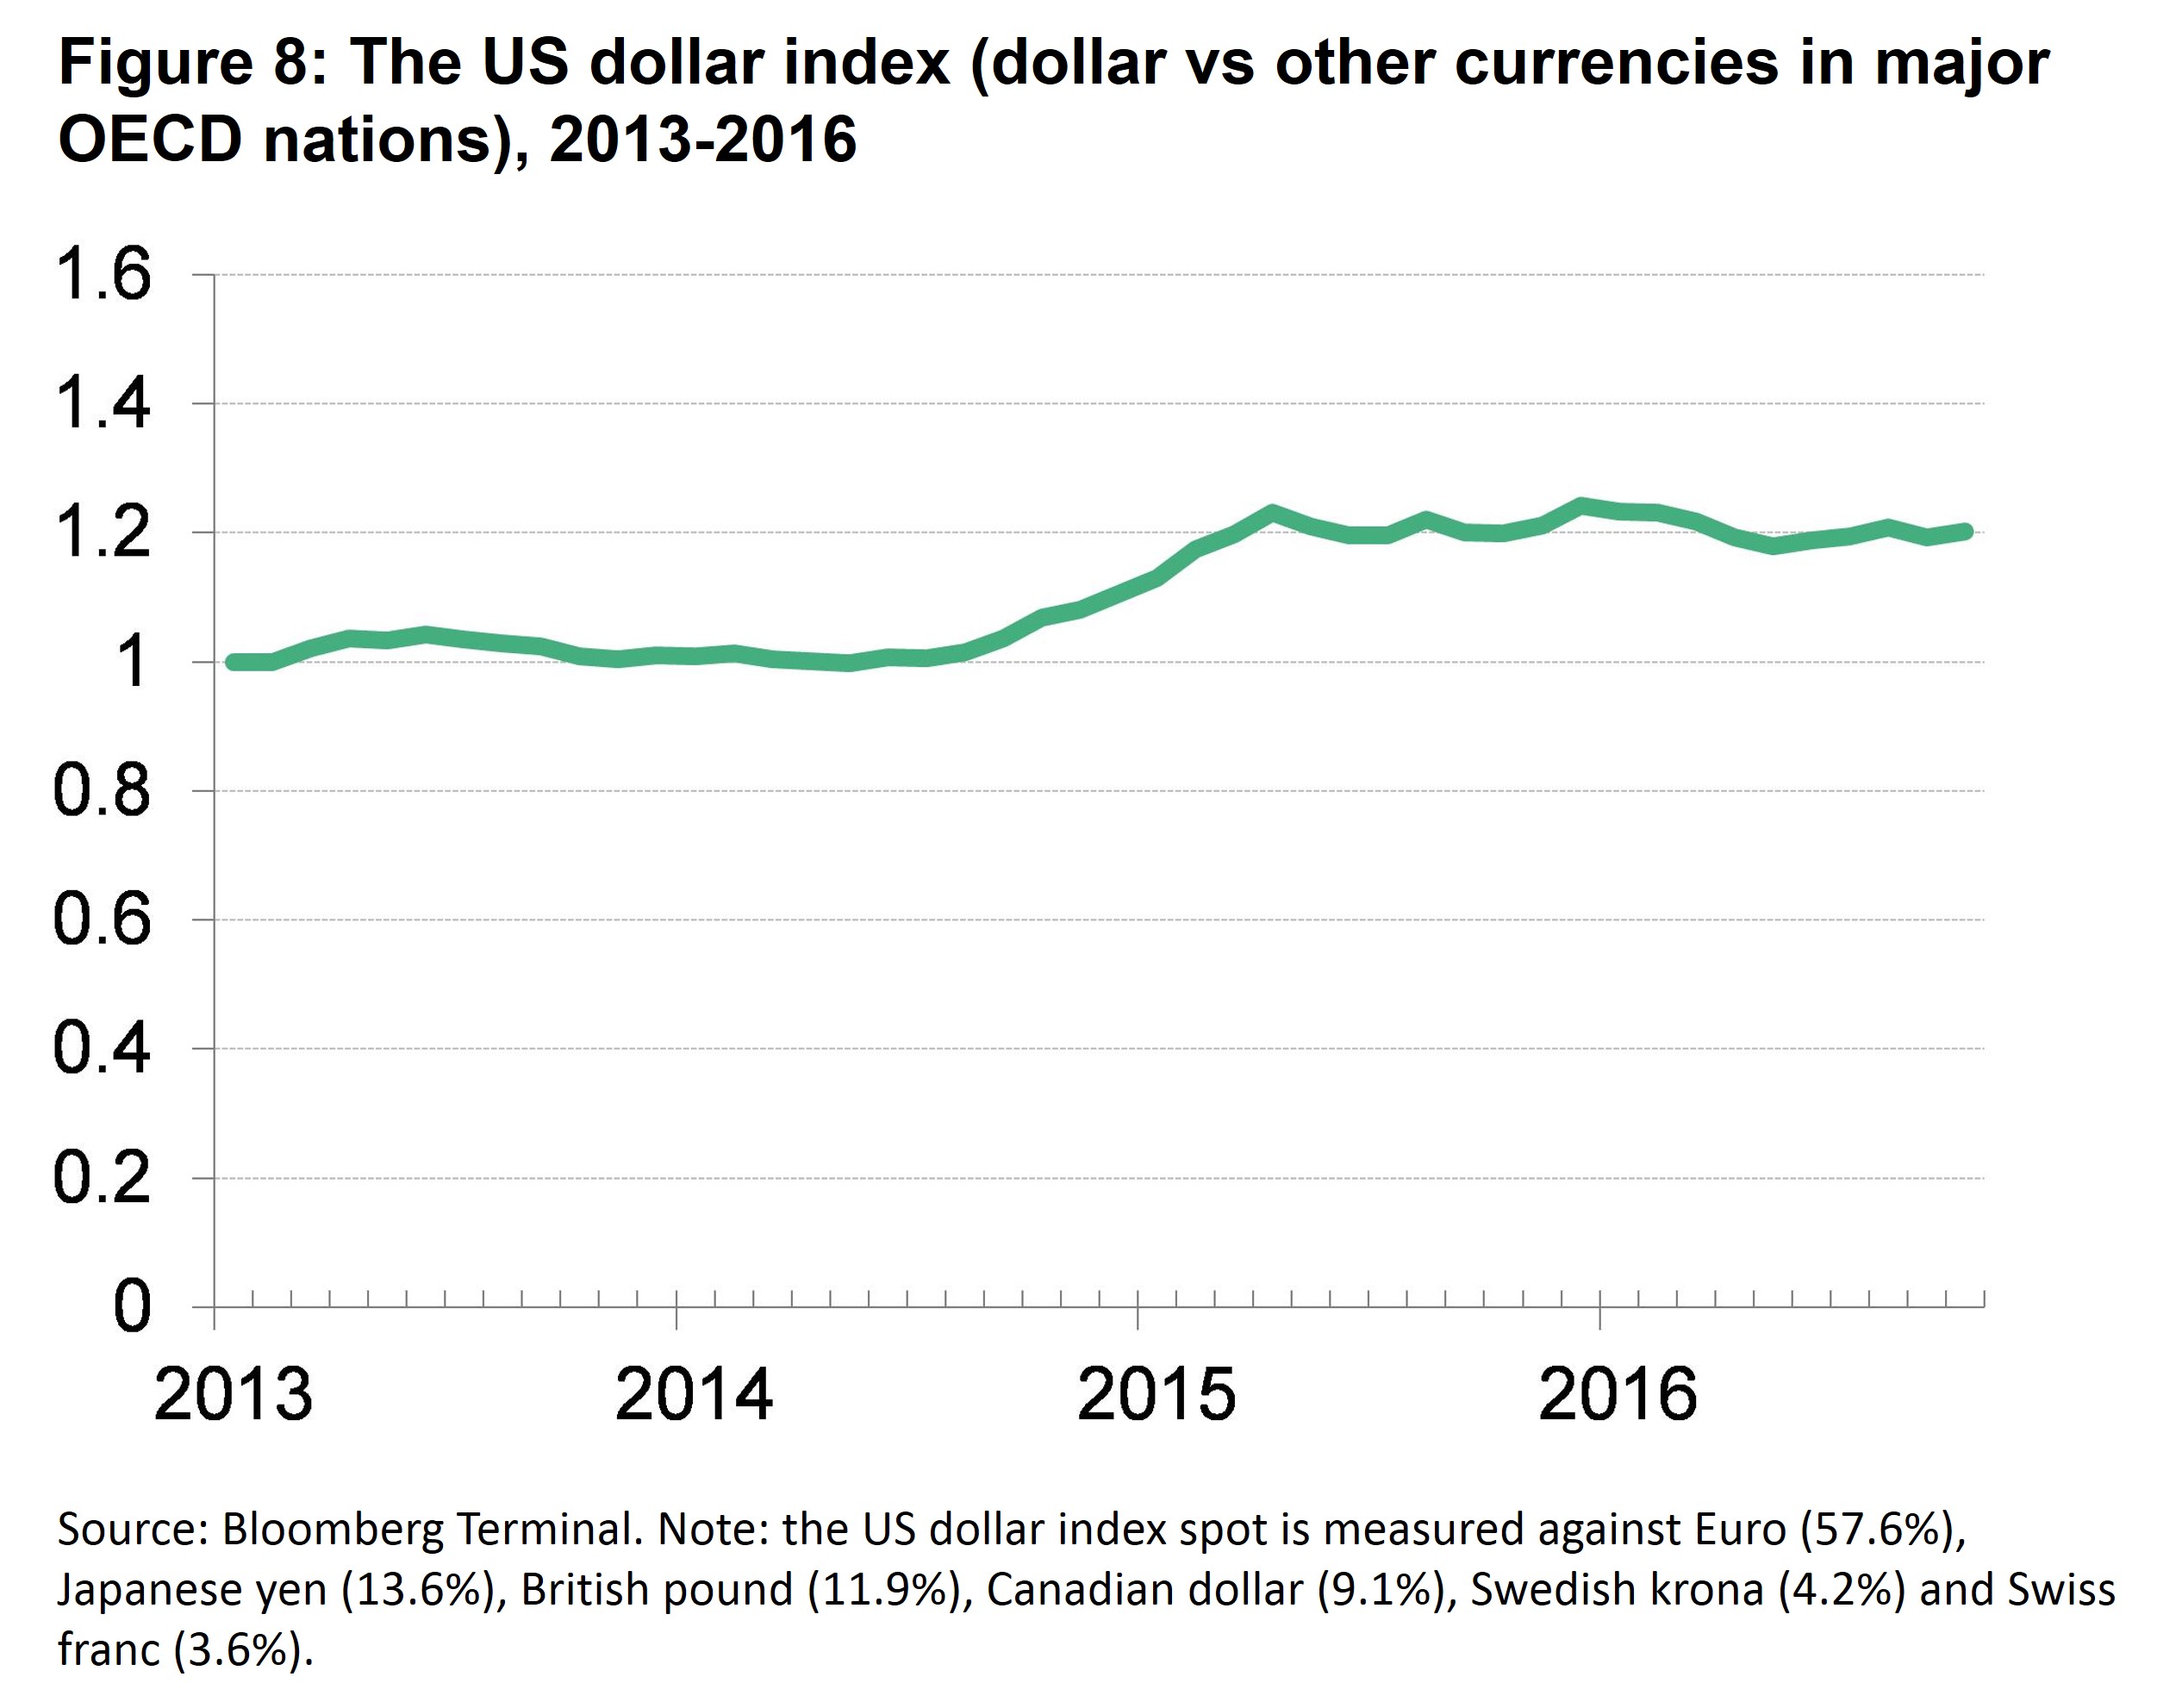 PI Fig 8 - The US dollar index (dollar vs other currencies in major OECD nations), 2013-2016 